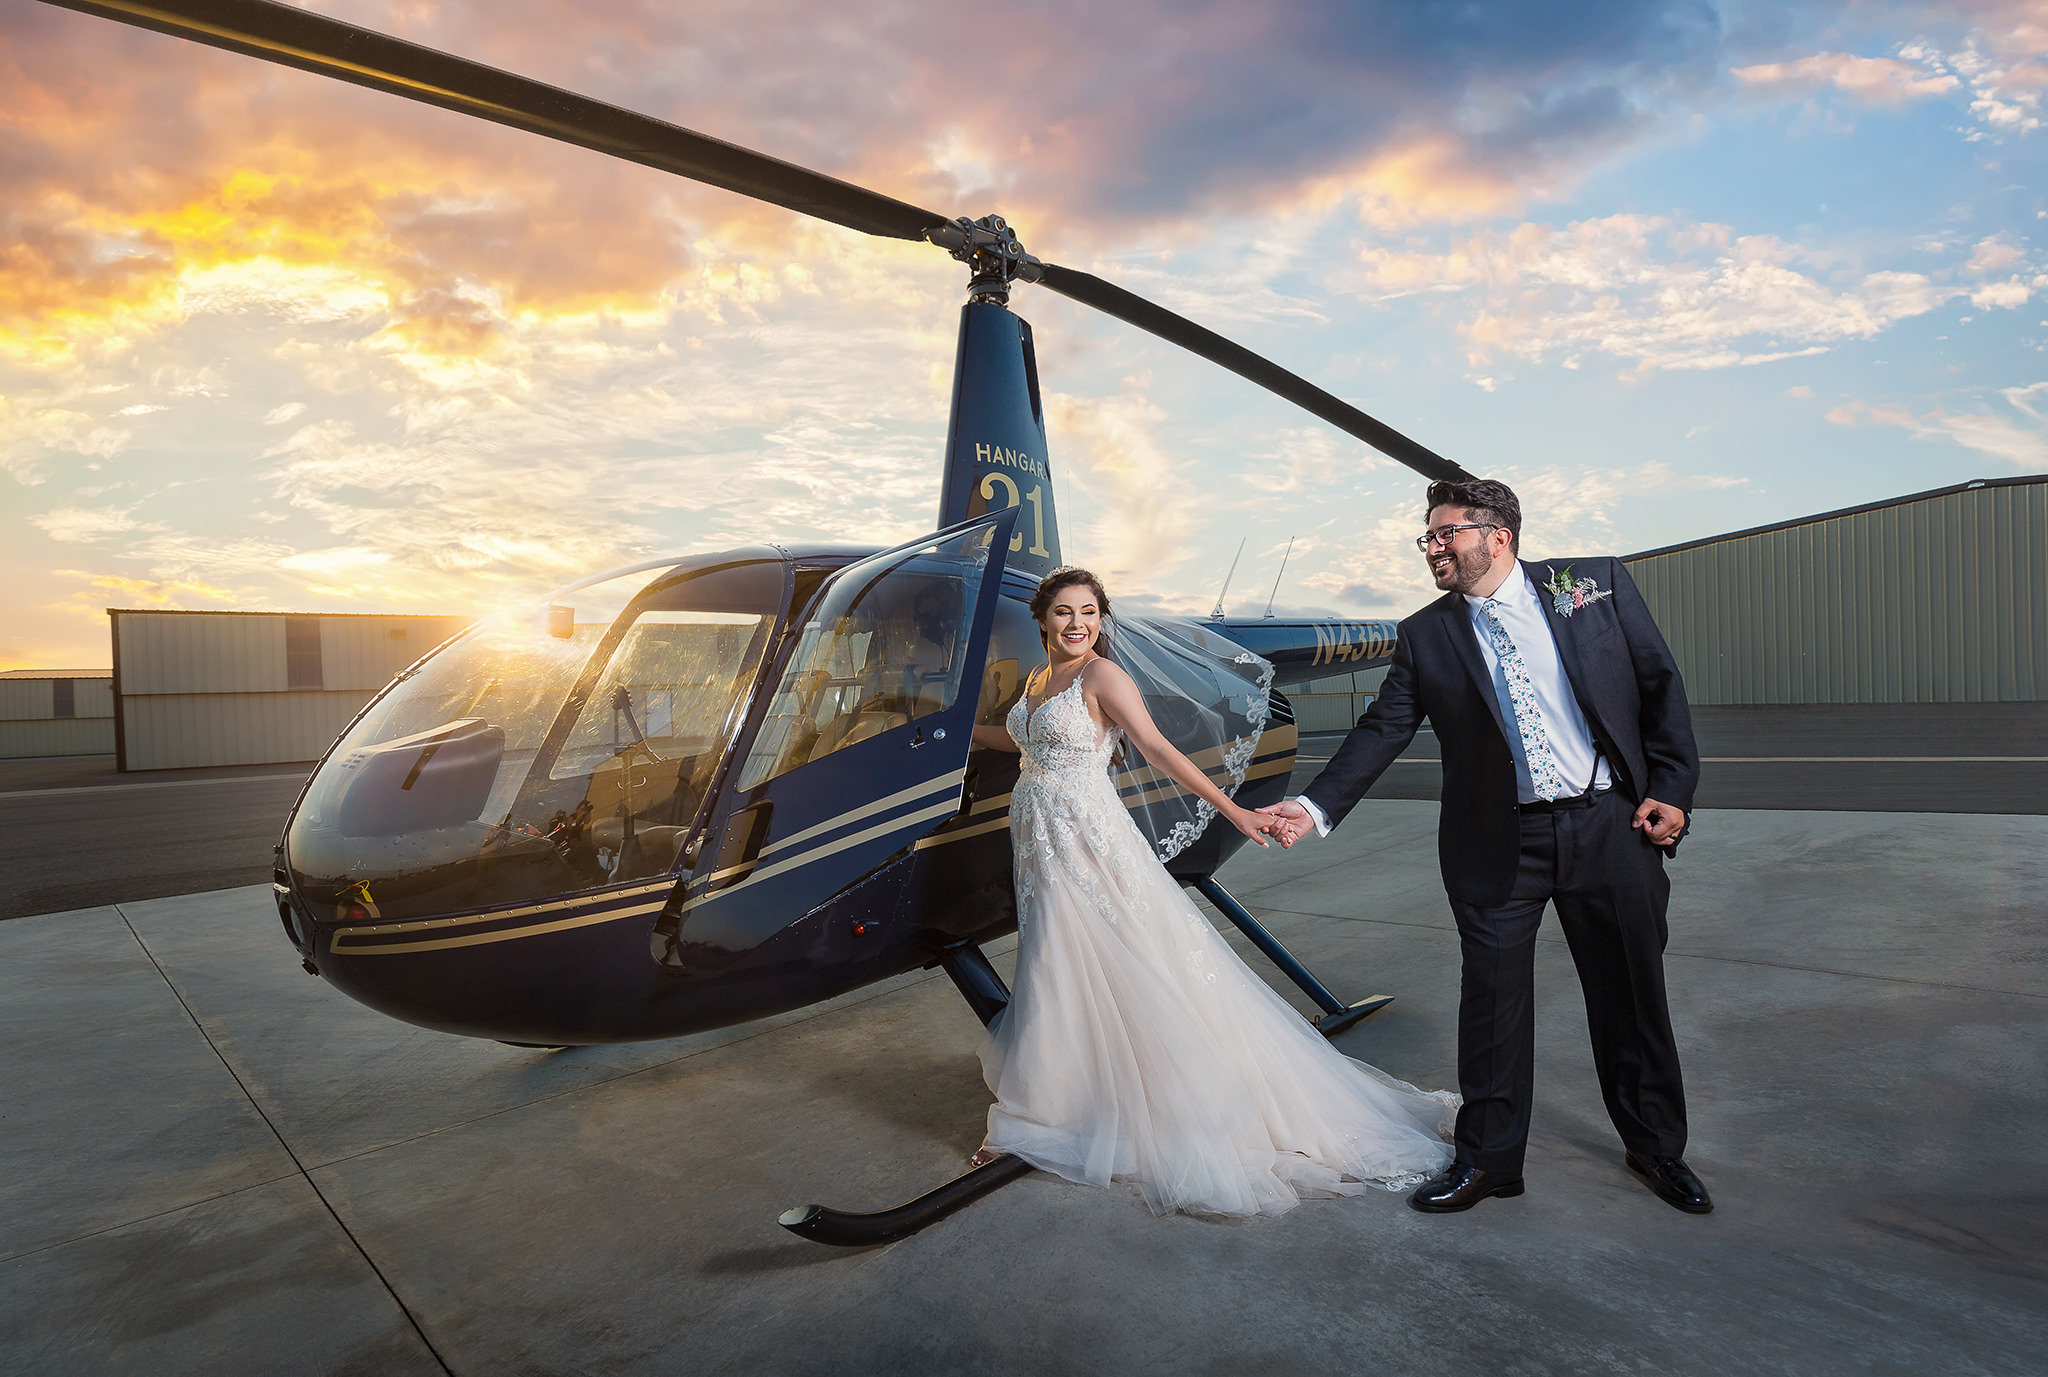 bride walking onto a helicopter on a rooftop with a sunset in the distance while her groom holds her hand captured by Dallas wedding photographers